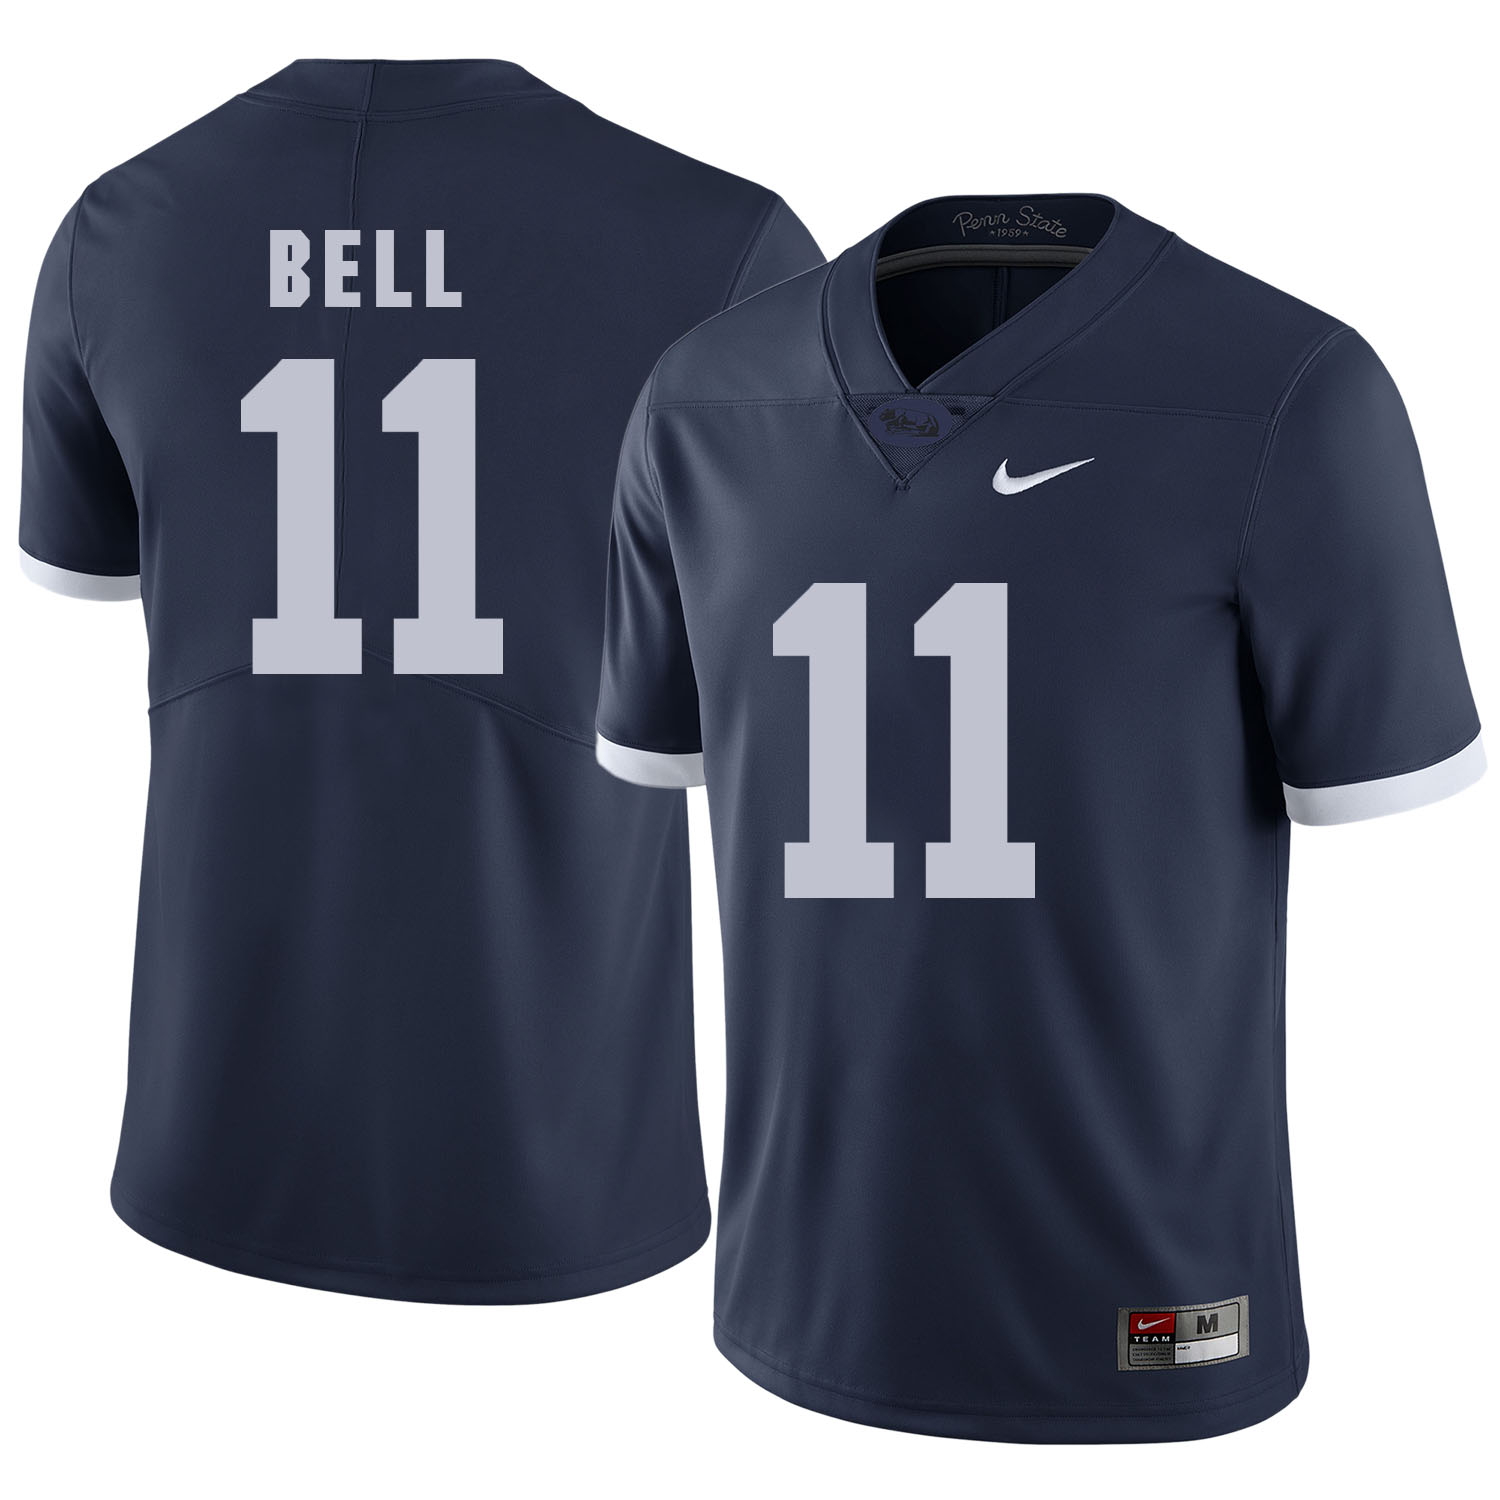 Penn State Nittany Lions 11 Brandon Bell Navy College Football Jersey